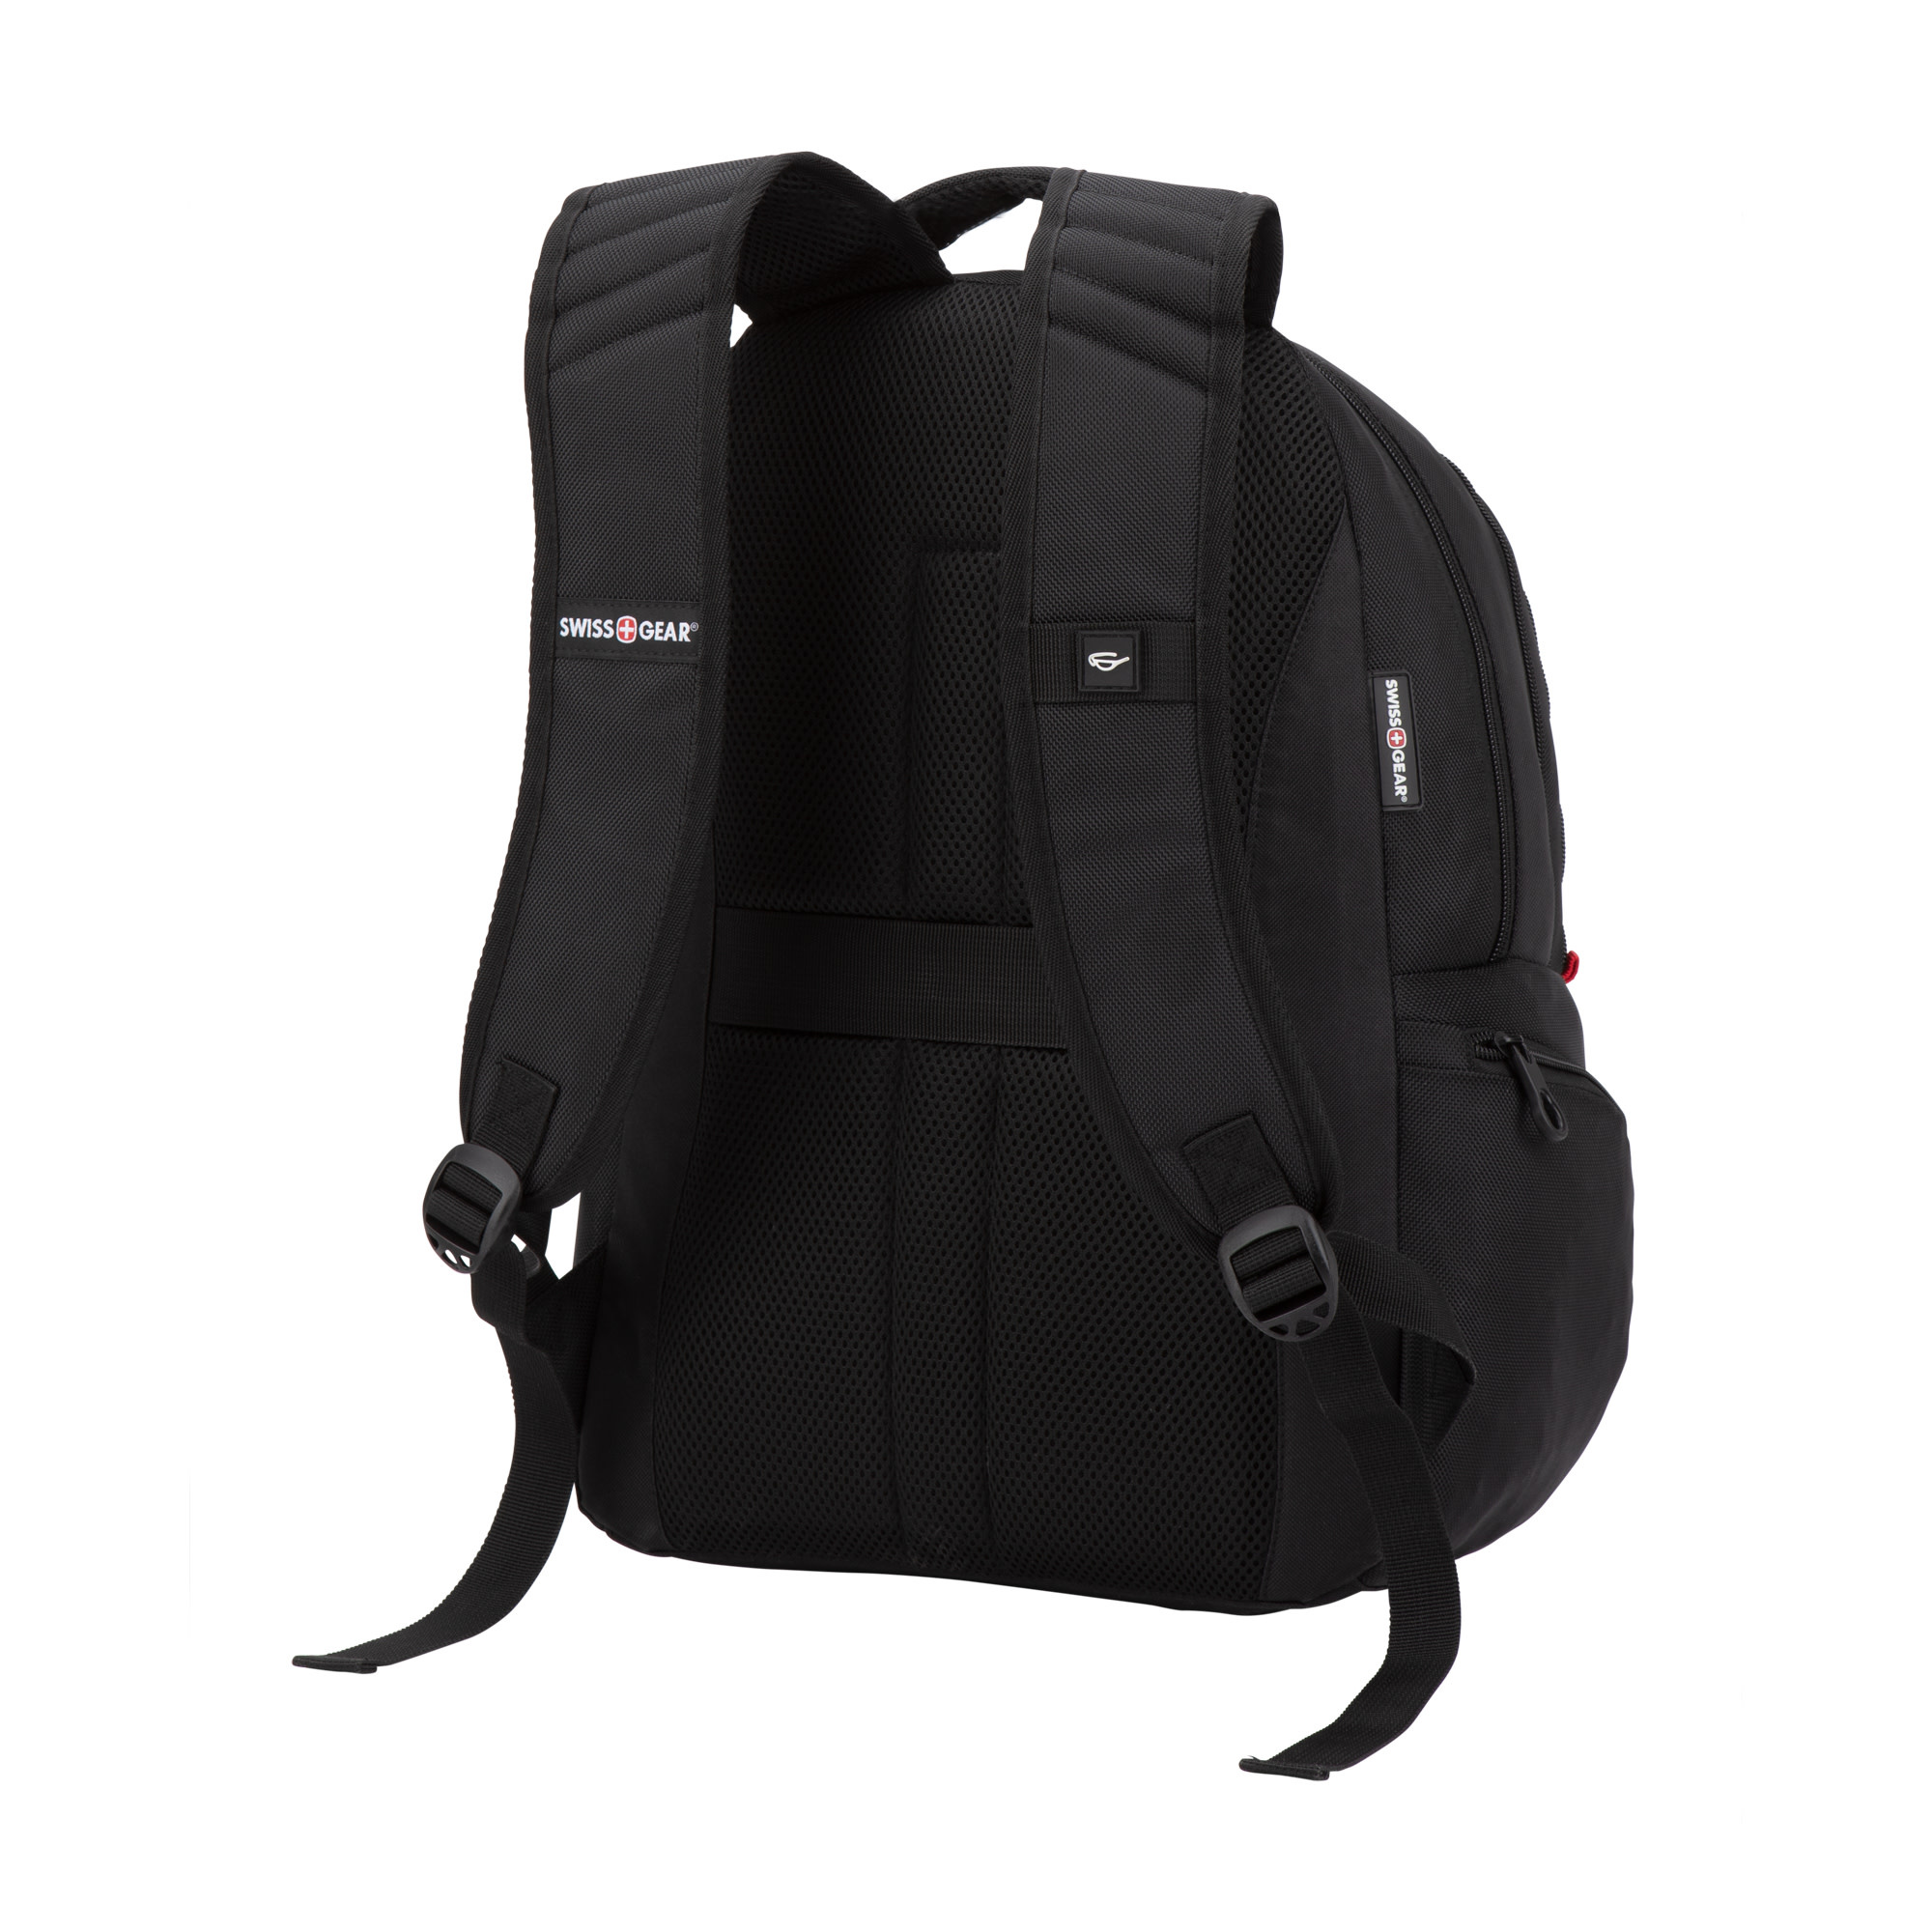 Swiss Army Laptop Backpack | Lowe's Zone Store